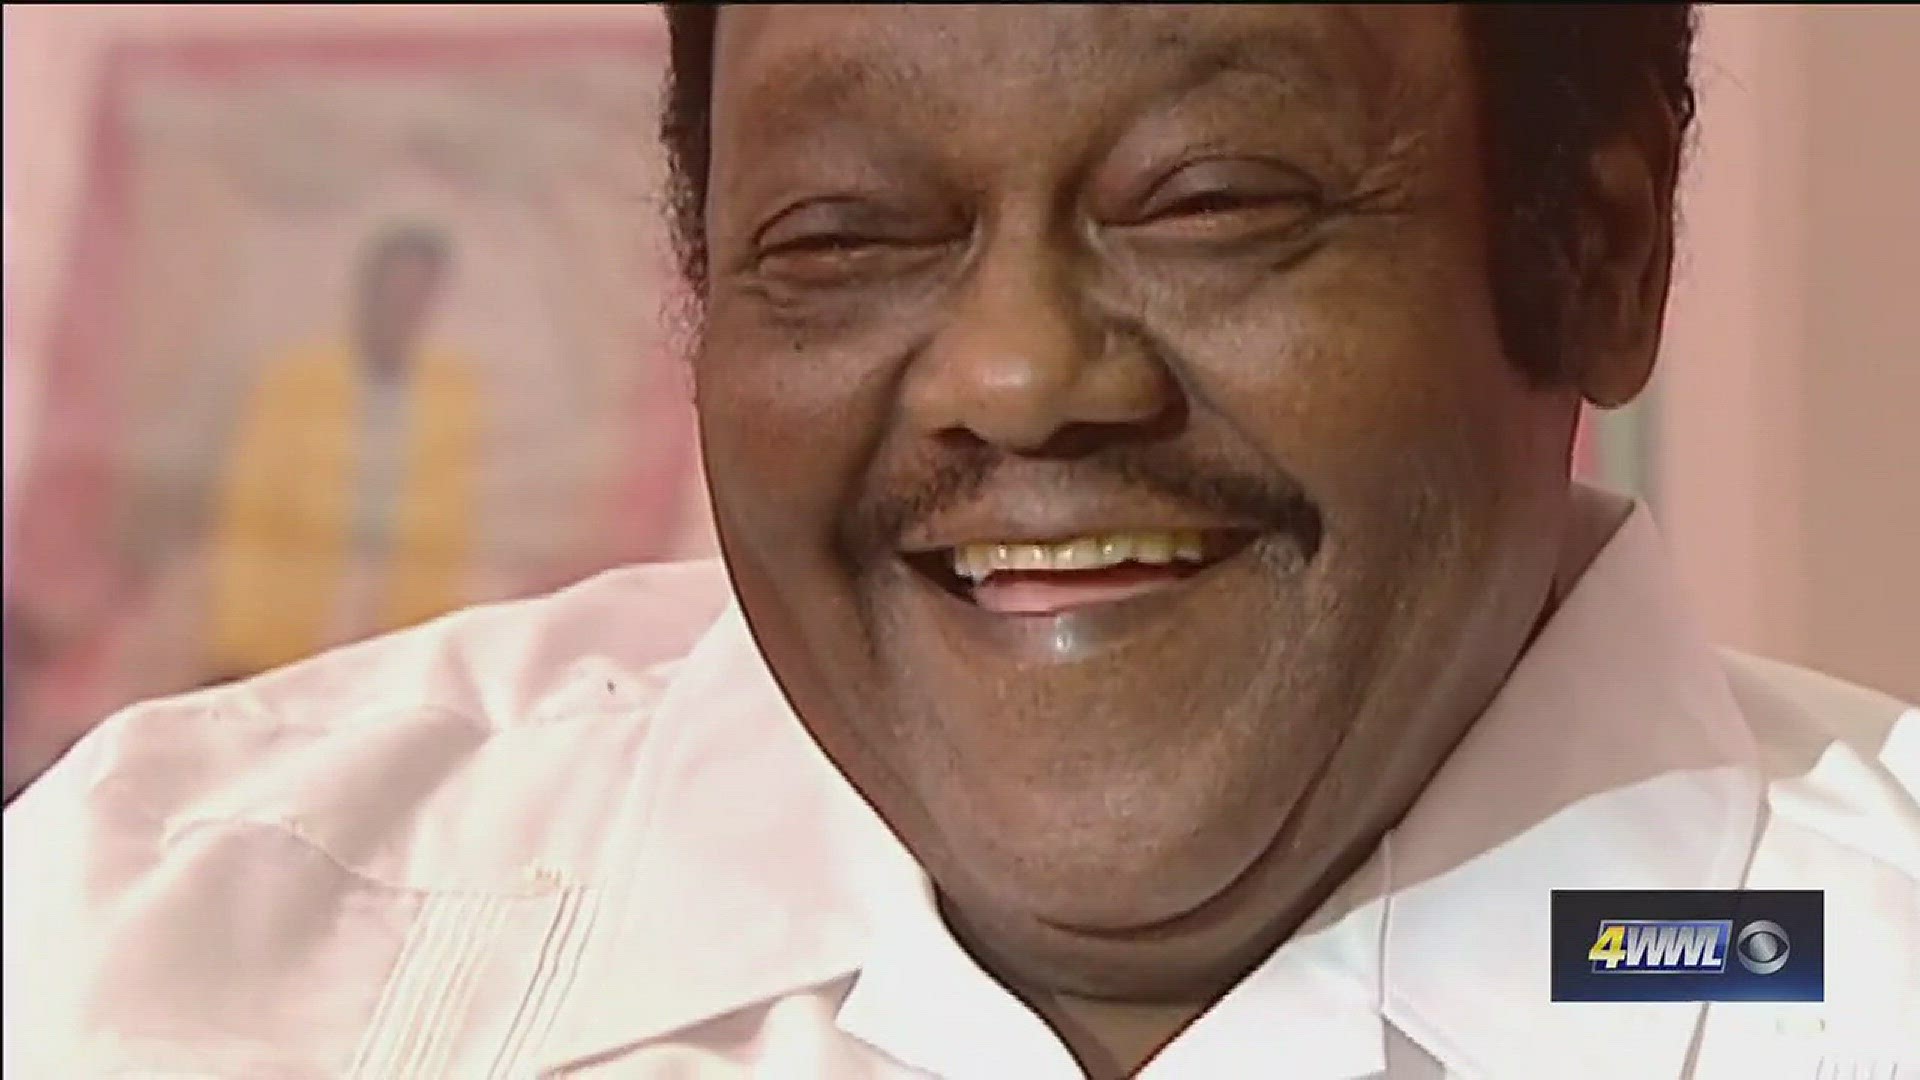 WWL-TV wanted to celebrate Fats Domino's life on what would have been his 90th birthday.